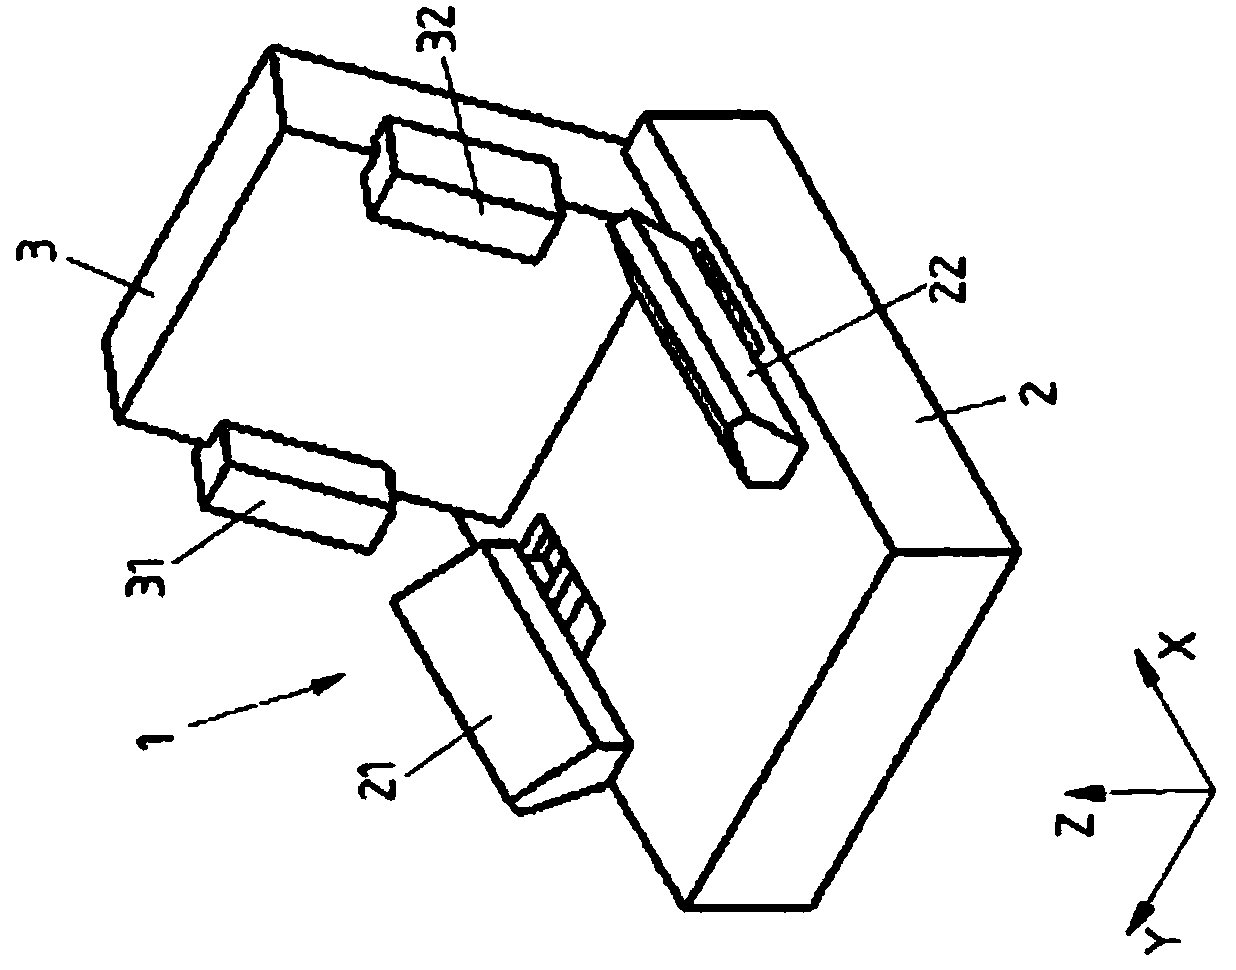 Device for adjusting at least one side member of a seat part and/or of a backrest of a vehicle seat